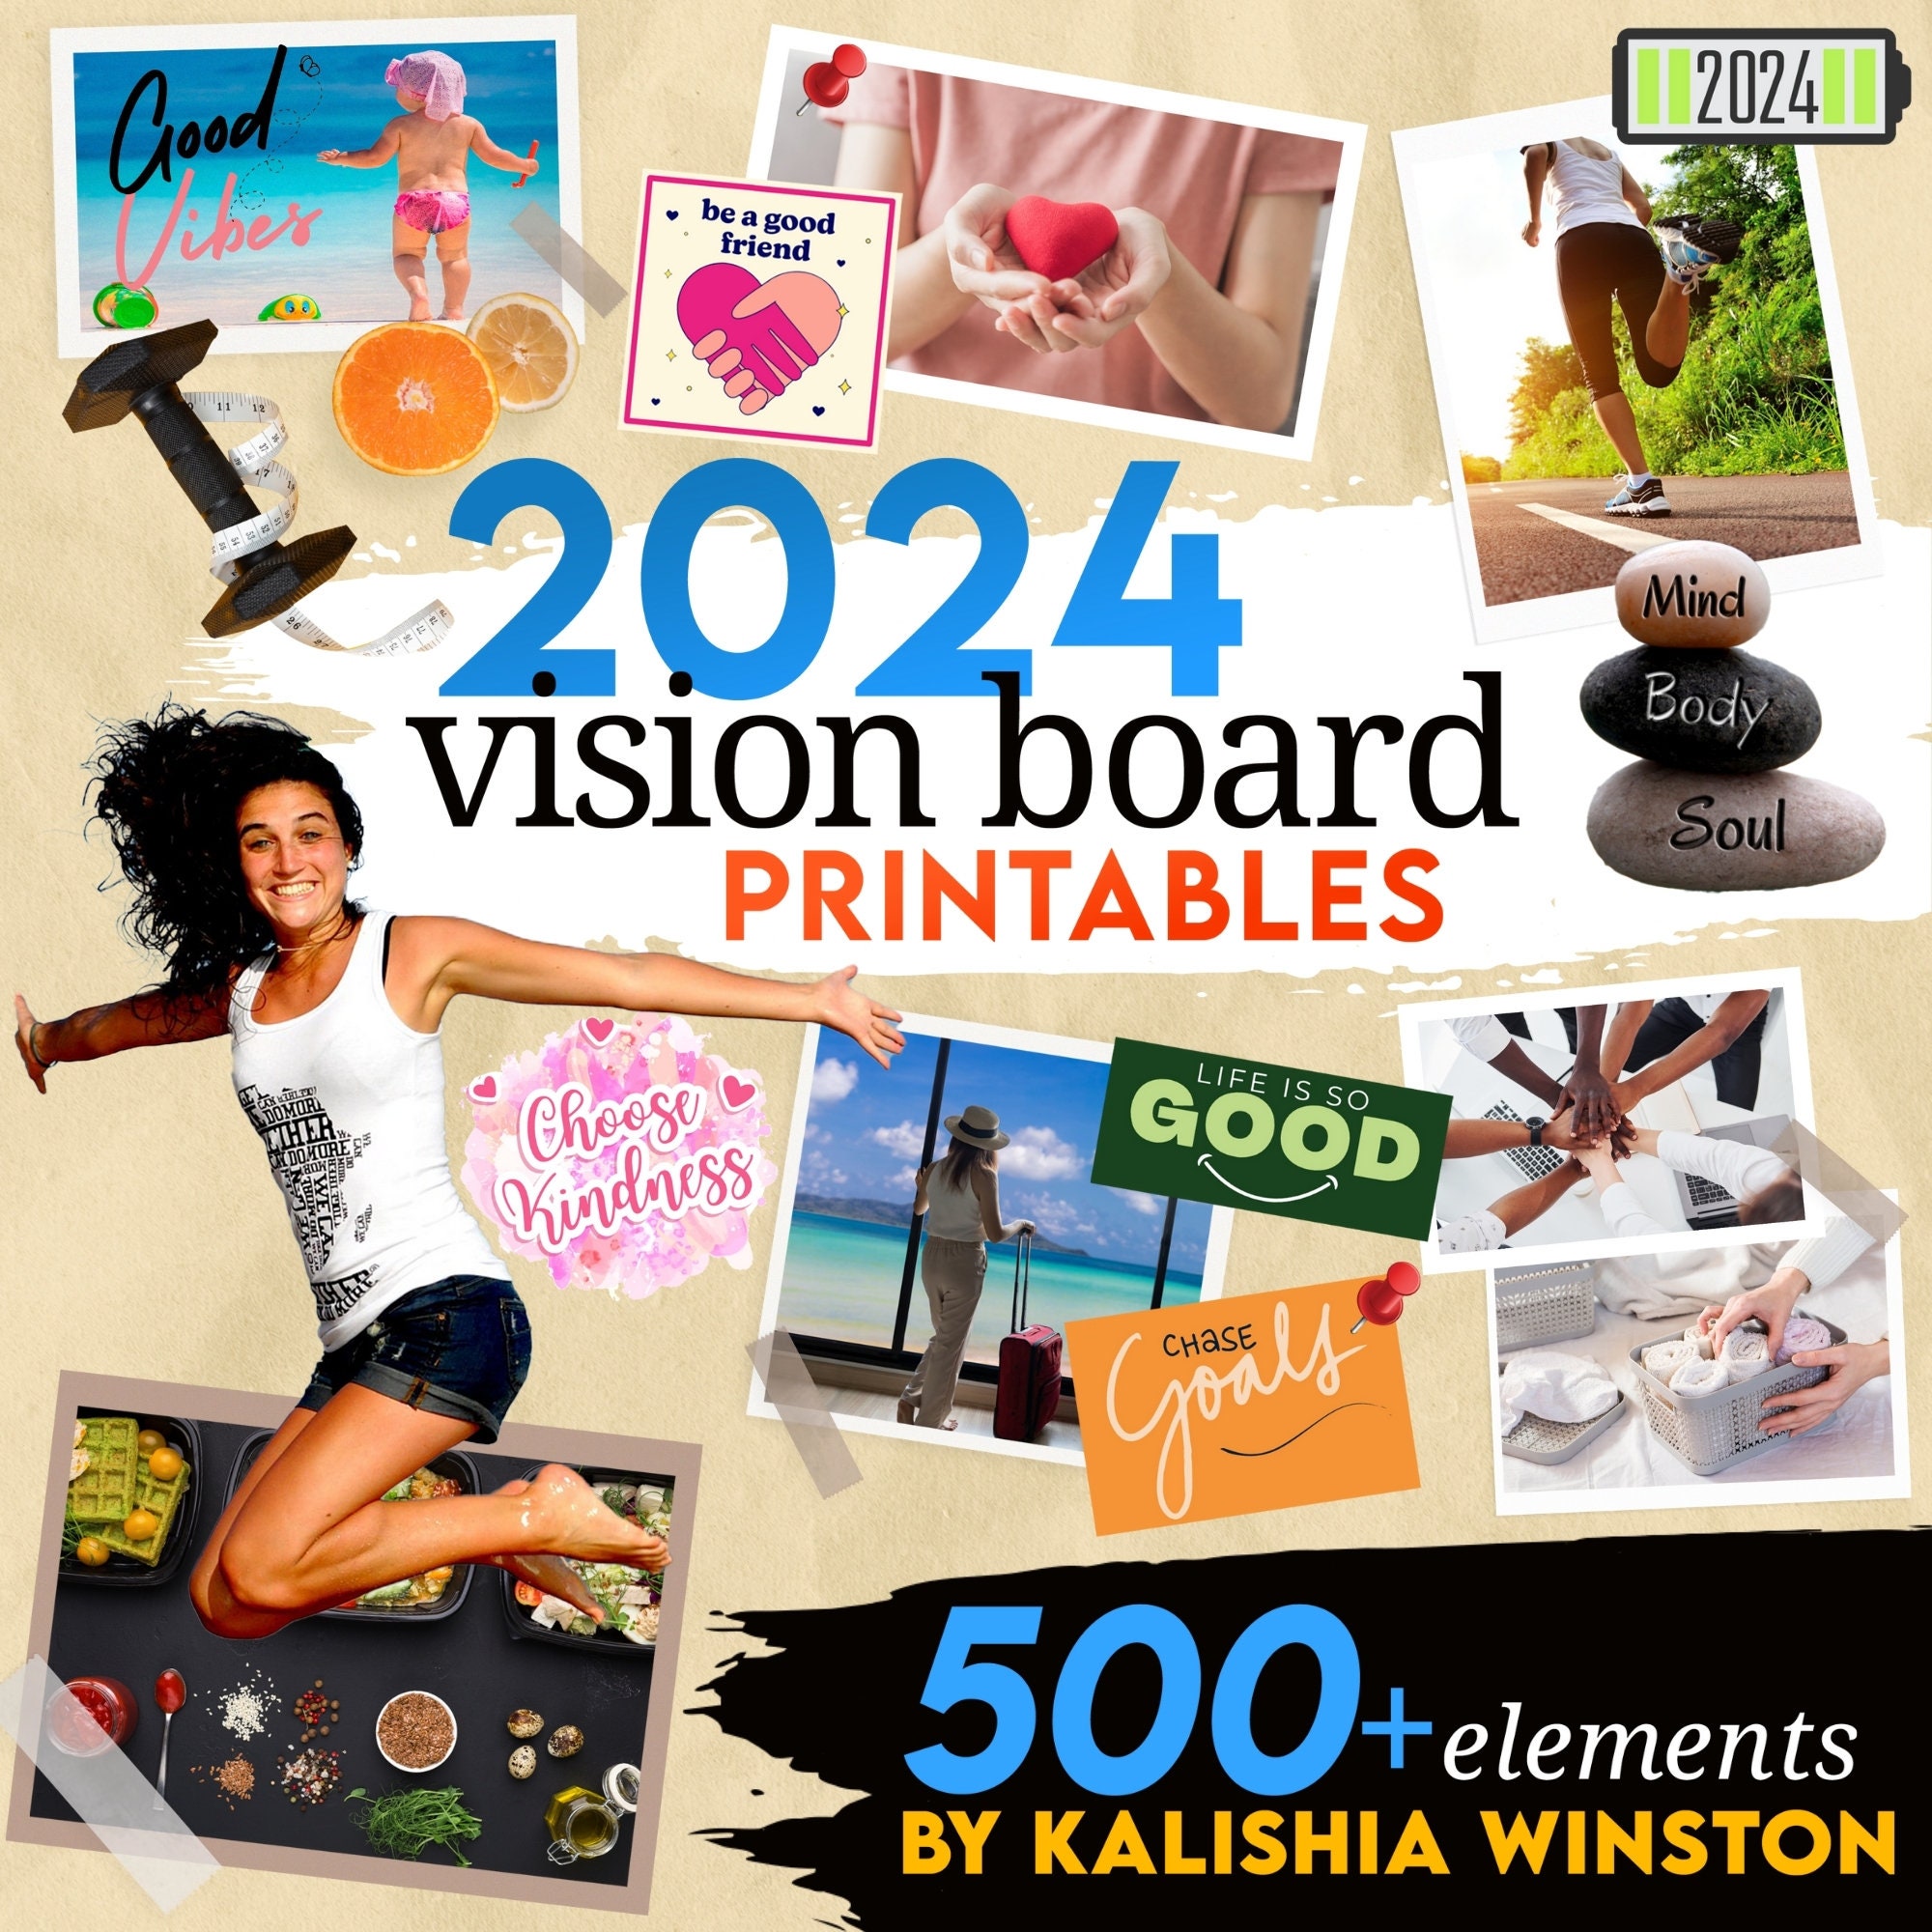 2024 Vision Board Clip Art Book For Black Women: An Extensive Beautiful  Collection of Inspiring Images, Quotes & Affirmations for Personal Growth